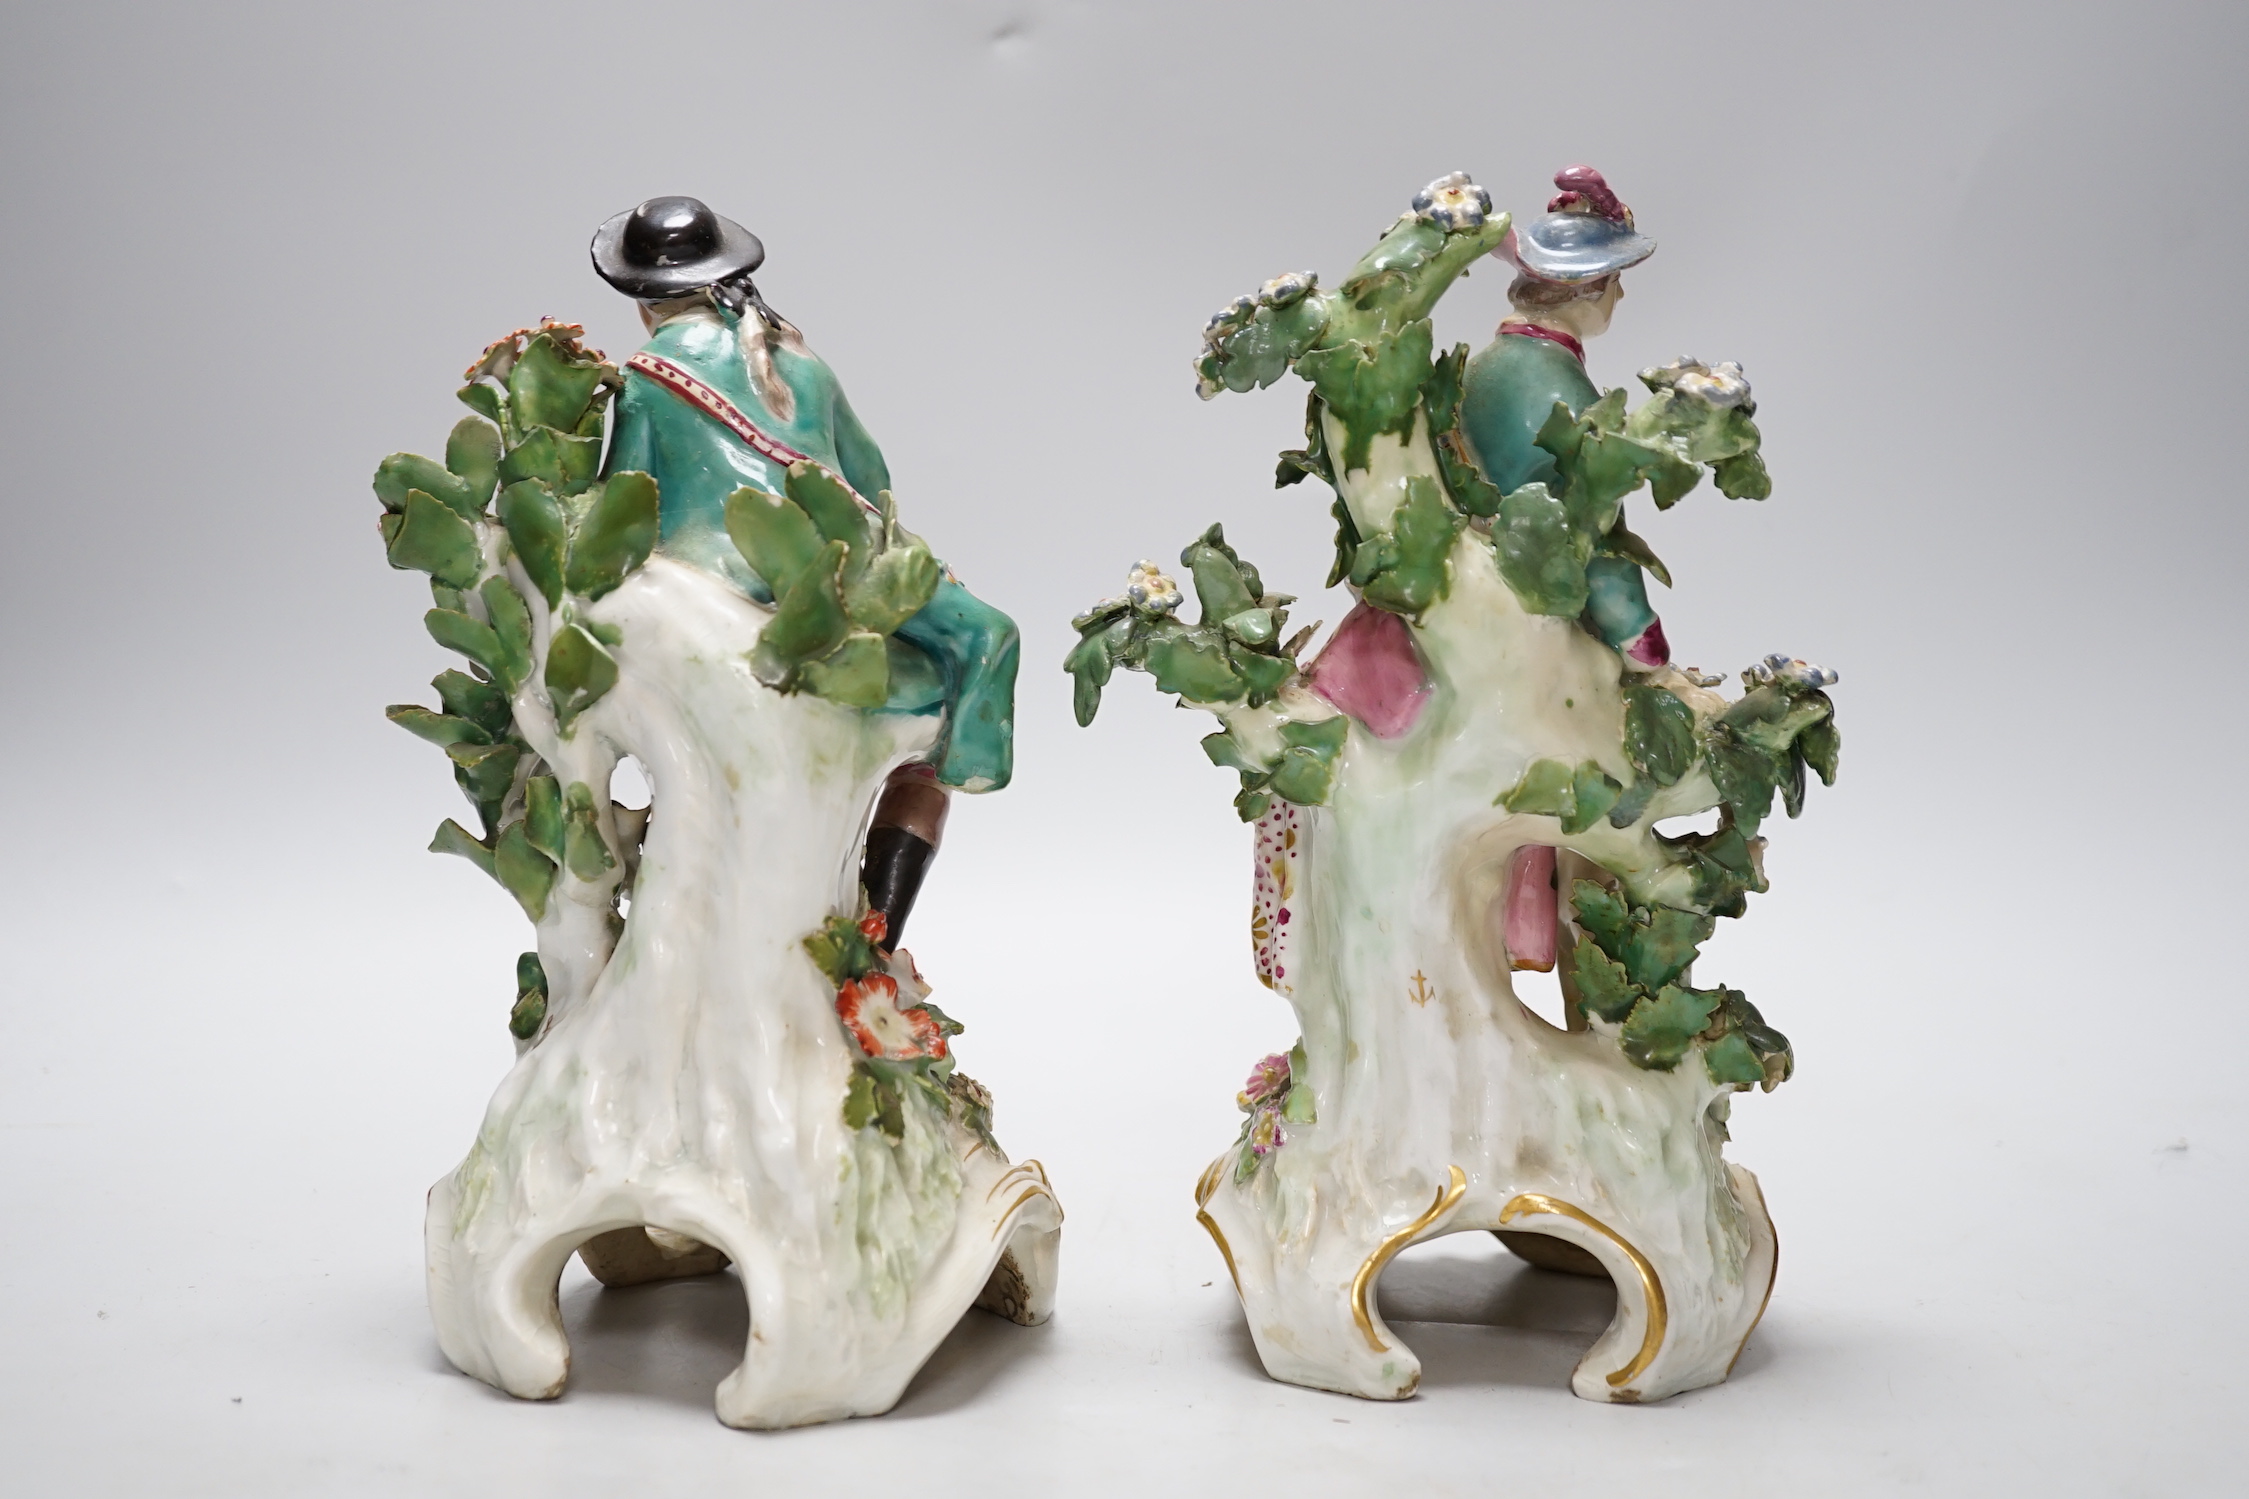 A pair of Chelsea gold anchor period figures wearing 18th century dress, c.1760-65, 22cm - Image 3 of 5